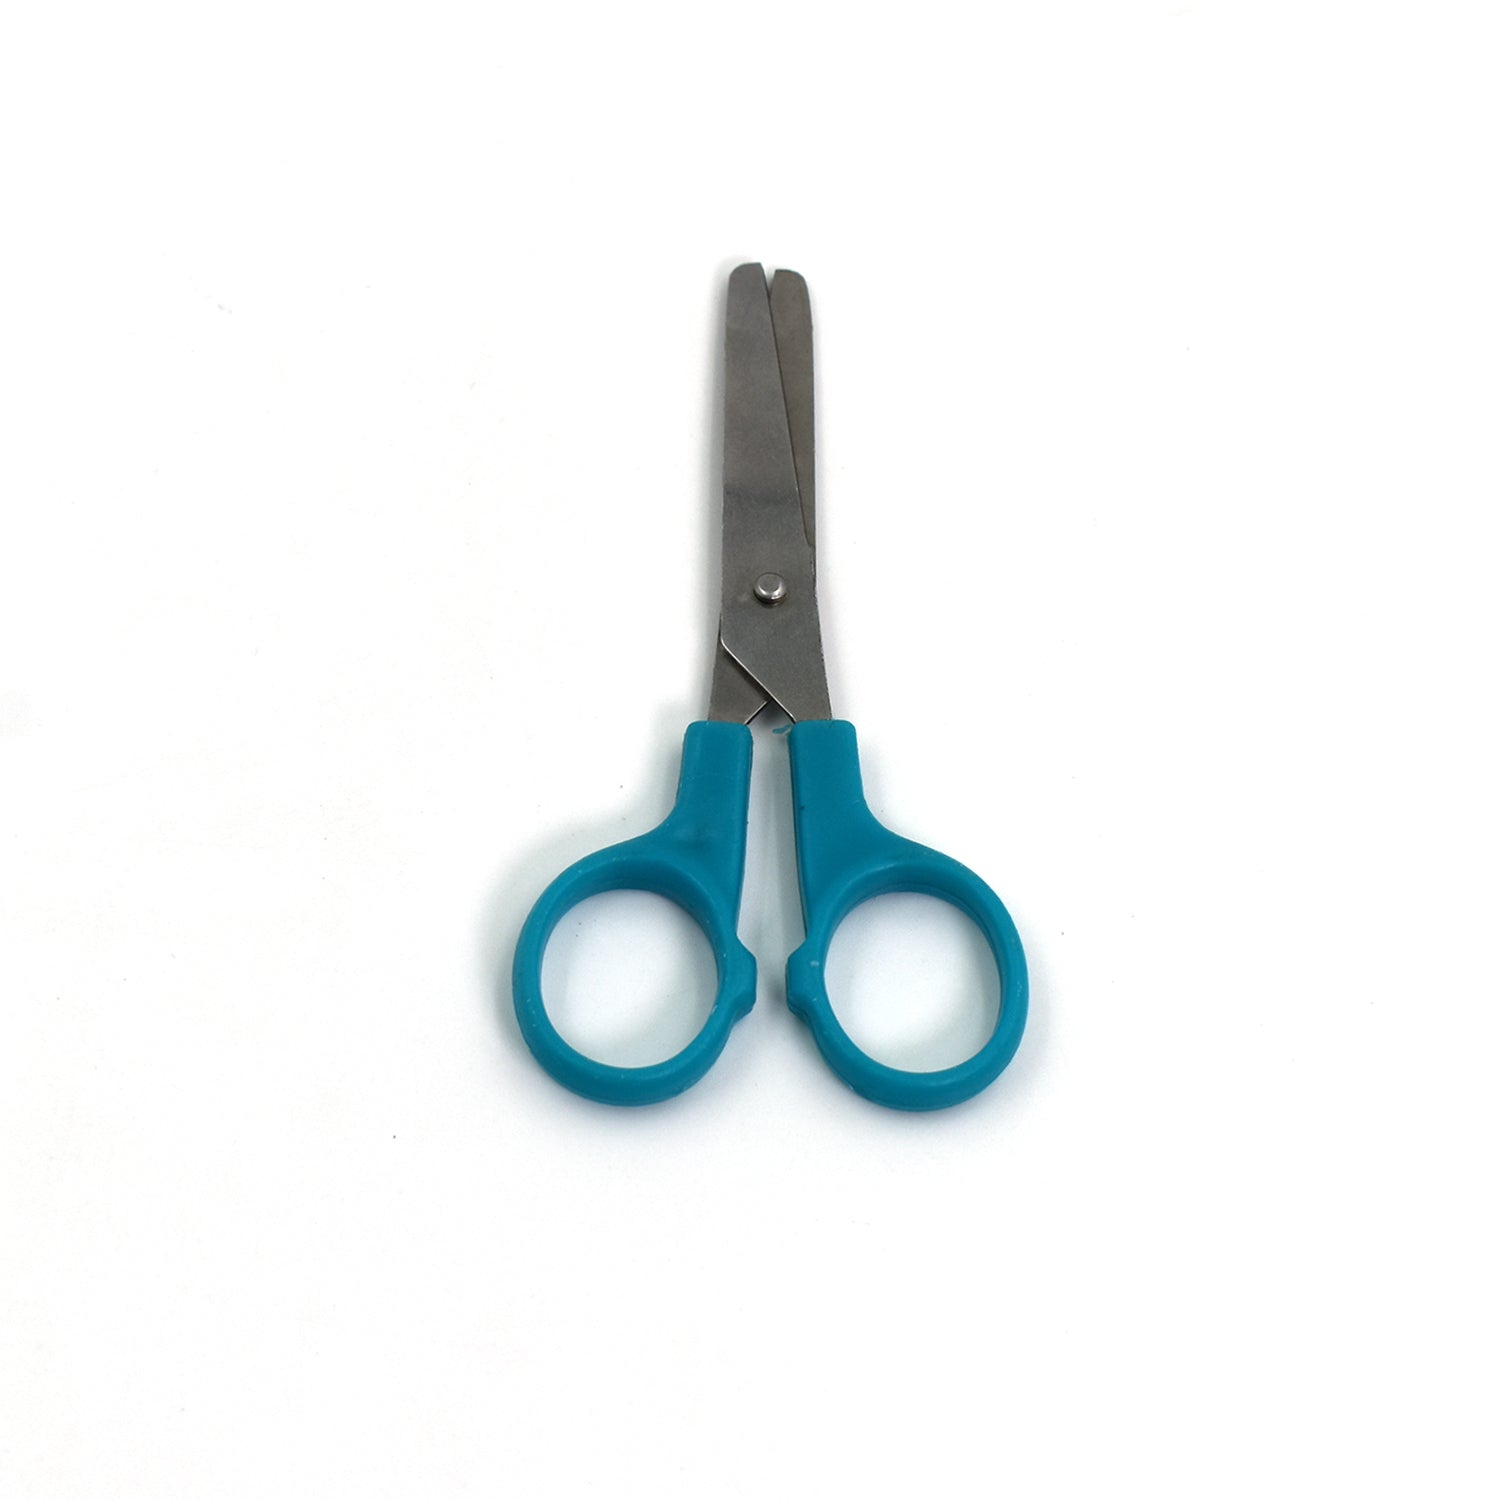 7621 Cn Mini Scissor No.1 For Cutting And Designing Purposes By Students And All Etc. DeoDap